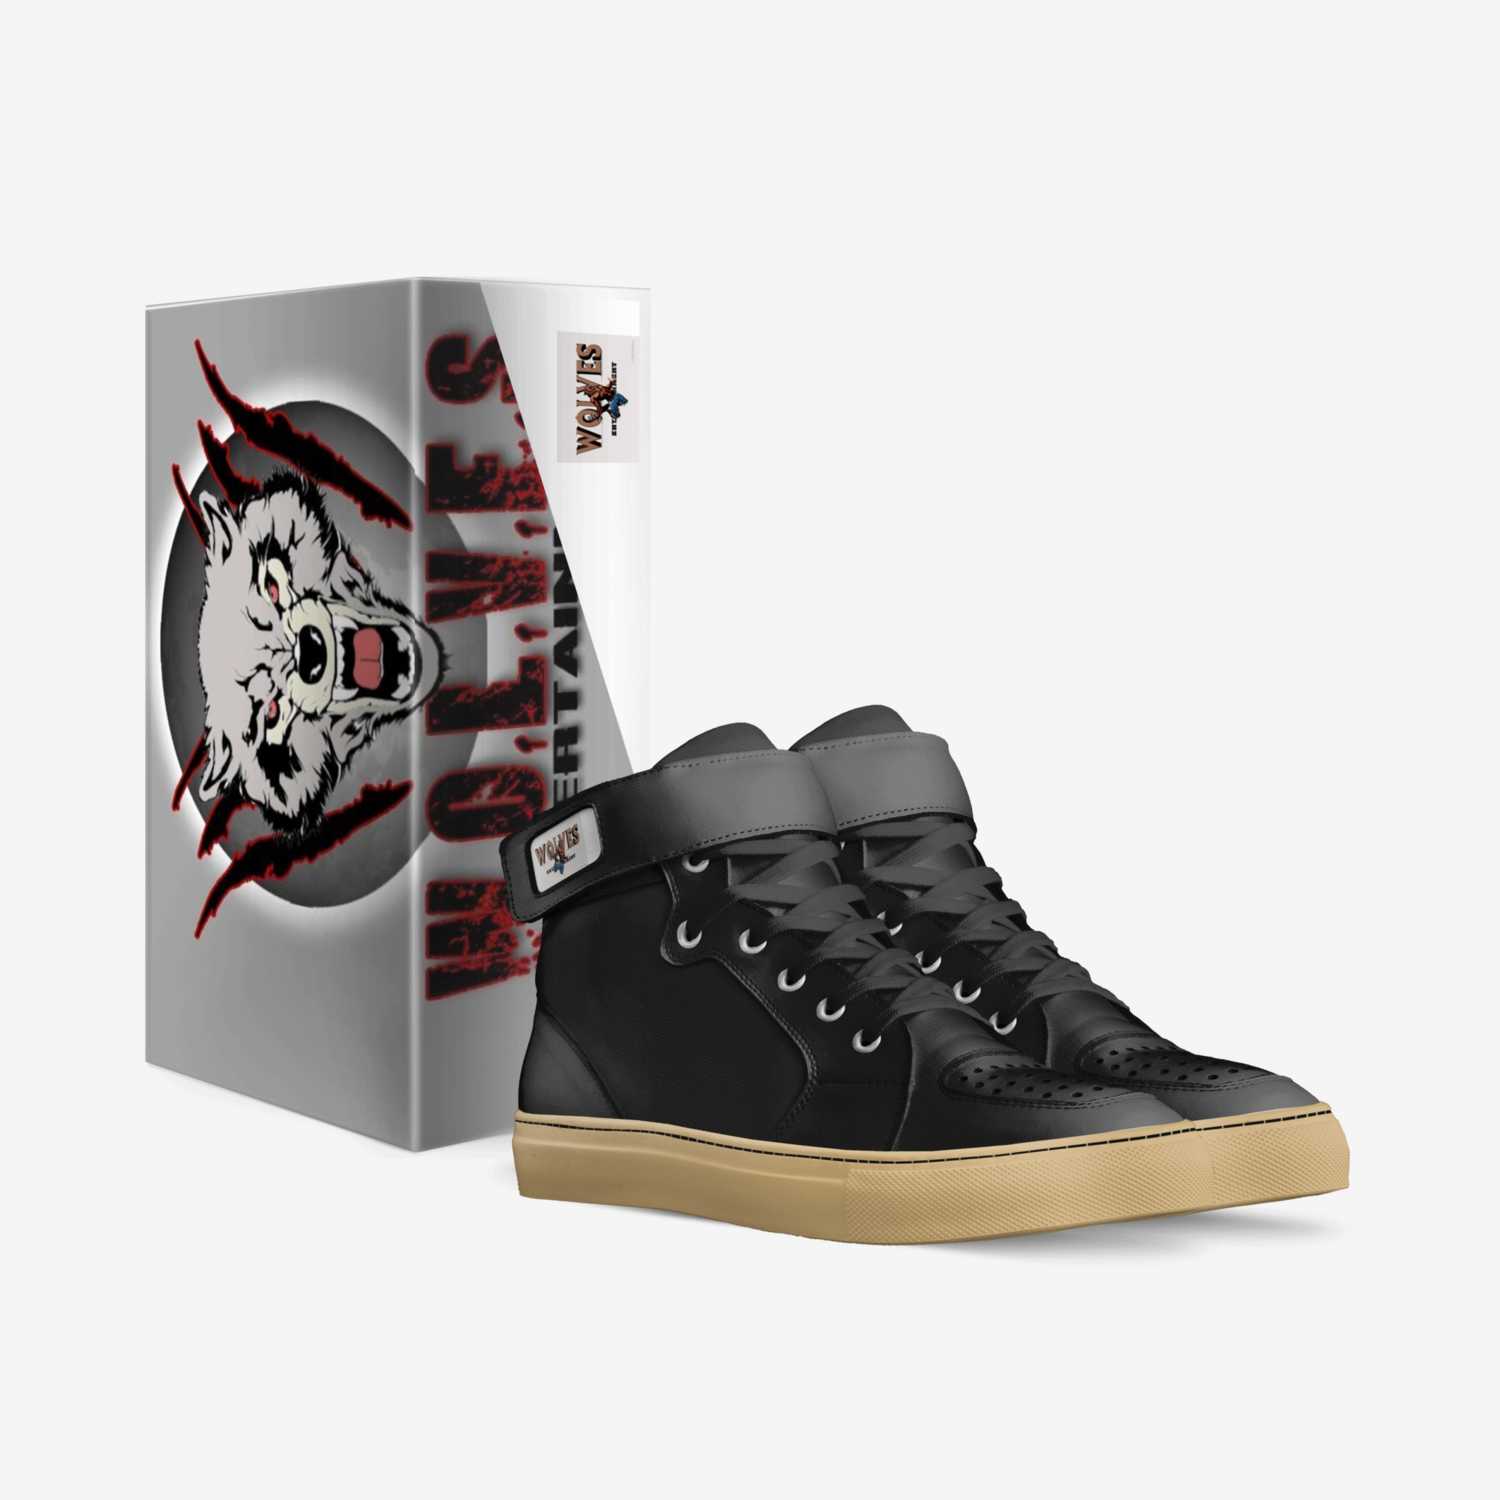 Wolves Gang custom made in Italy shoes by Steven Anderson | Box view